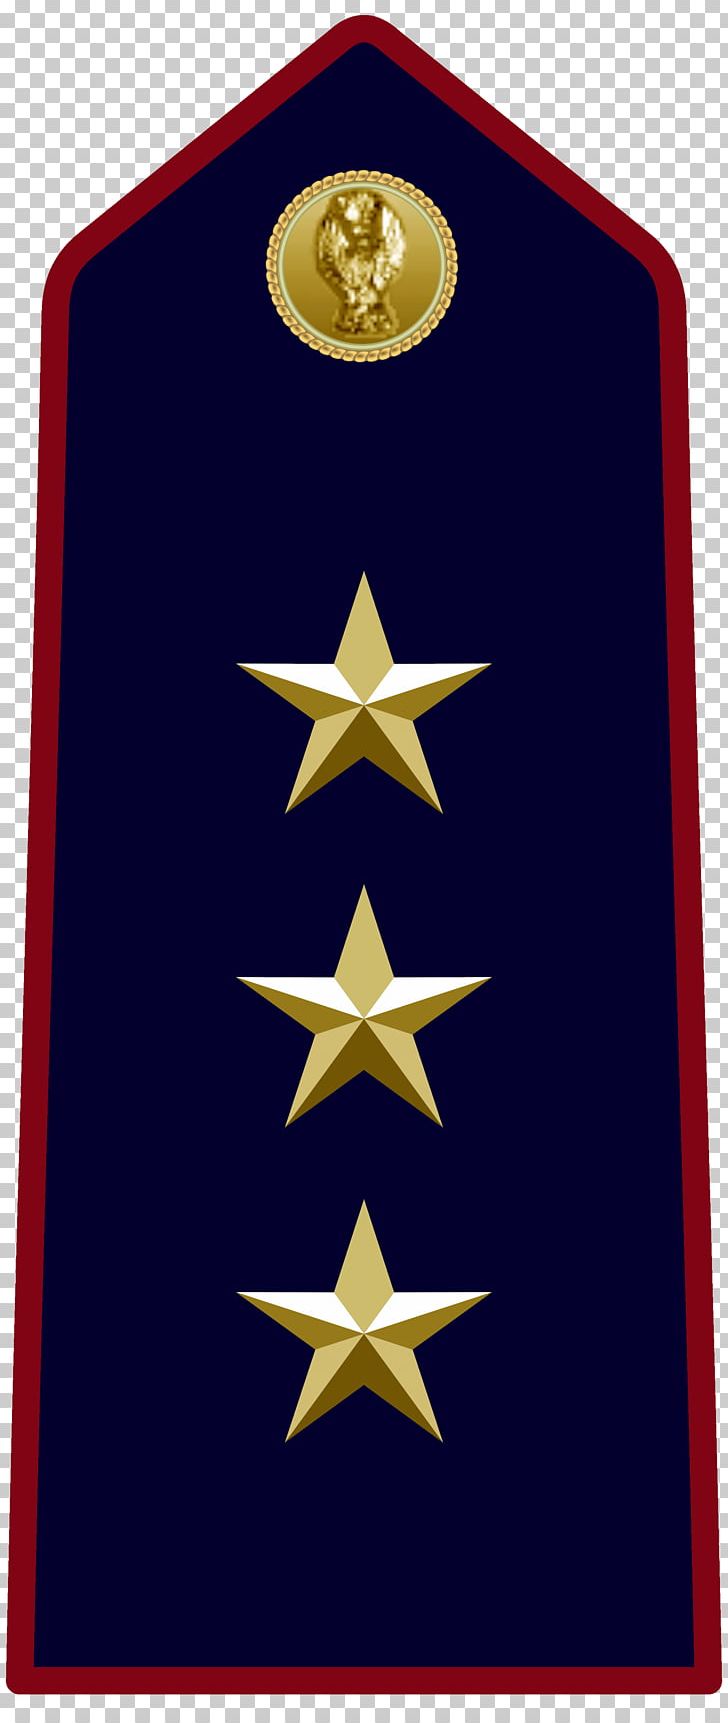 Rank Insignia Of The Carabinieri Military Rank Police Commissioner Major PNG, Clipart, Army Officer, Captain, Carabinieri, Colonel, Cpr Free PNG Download